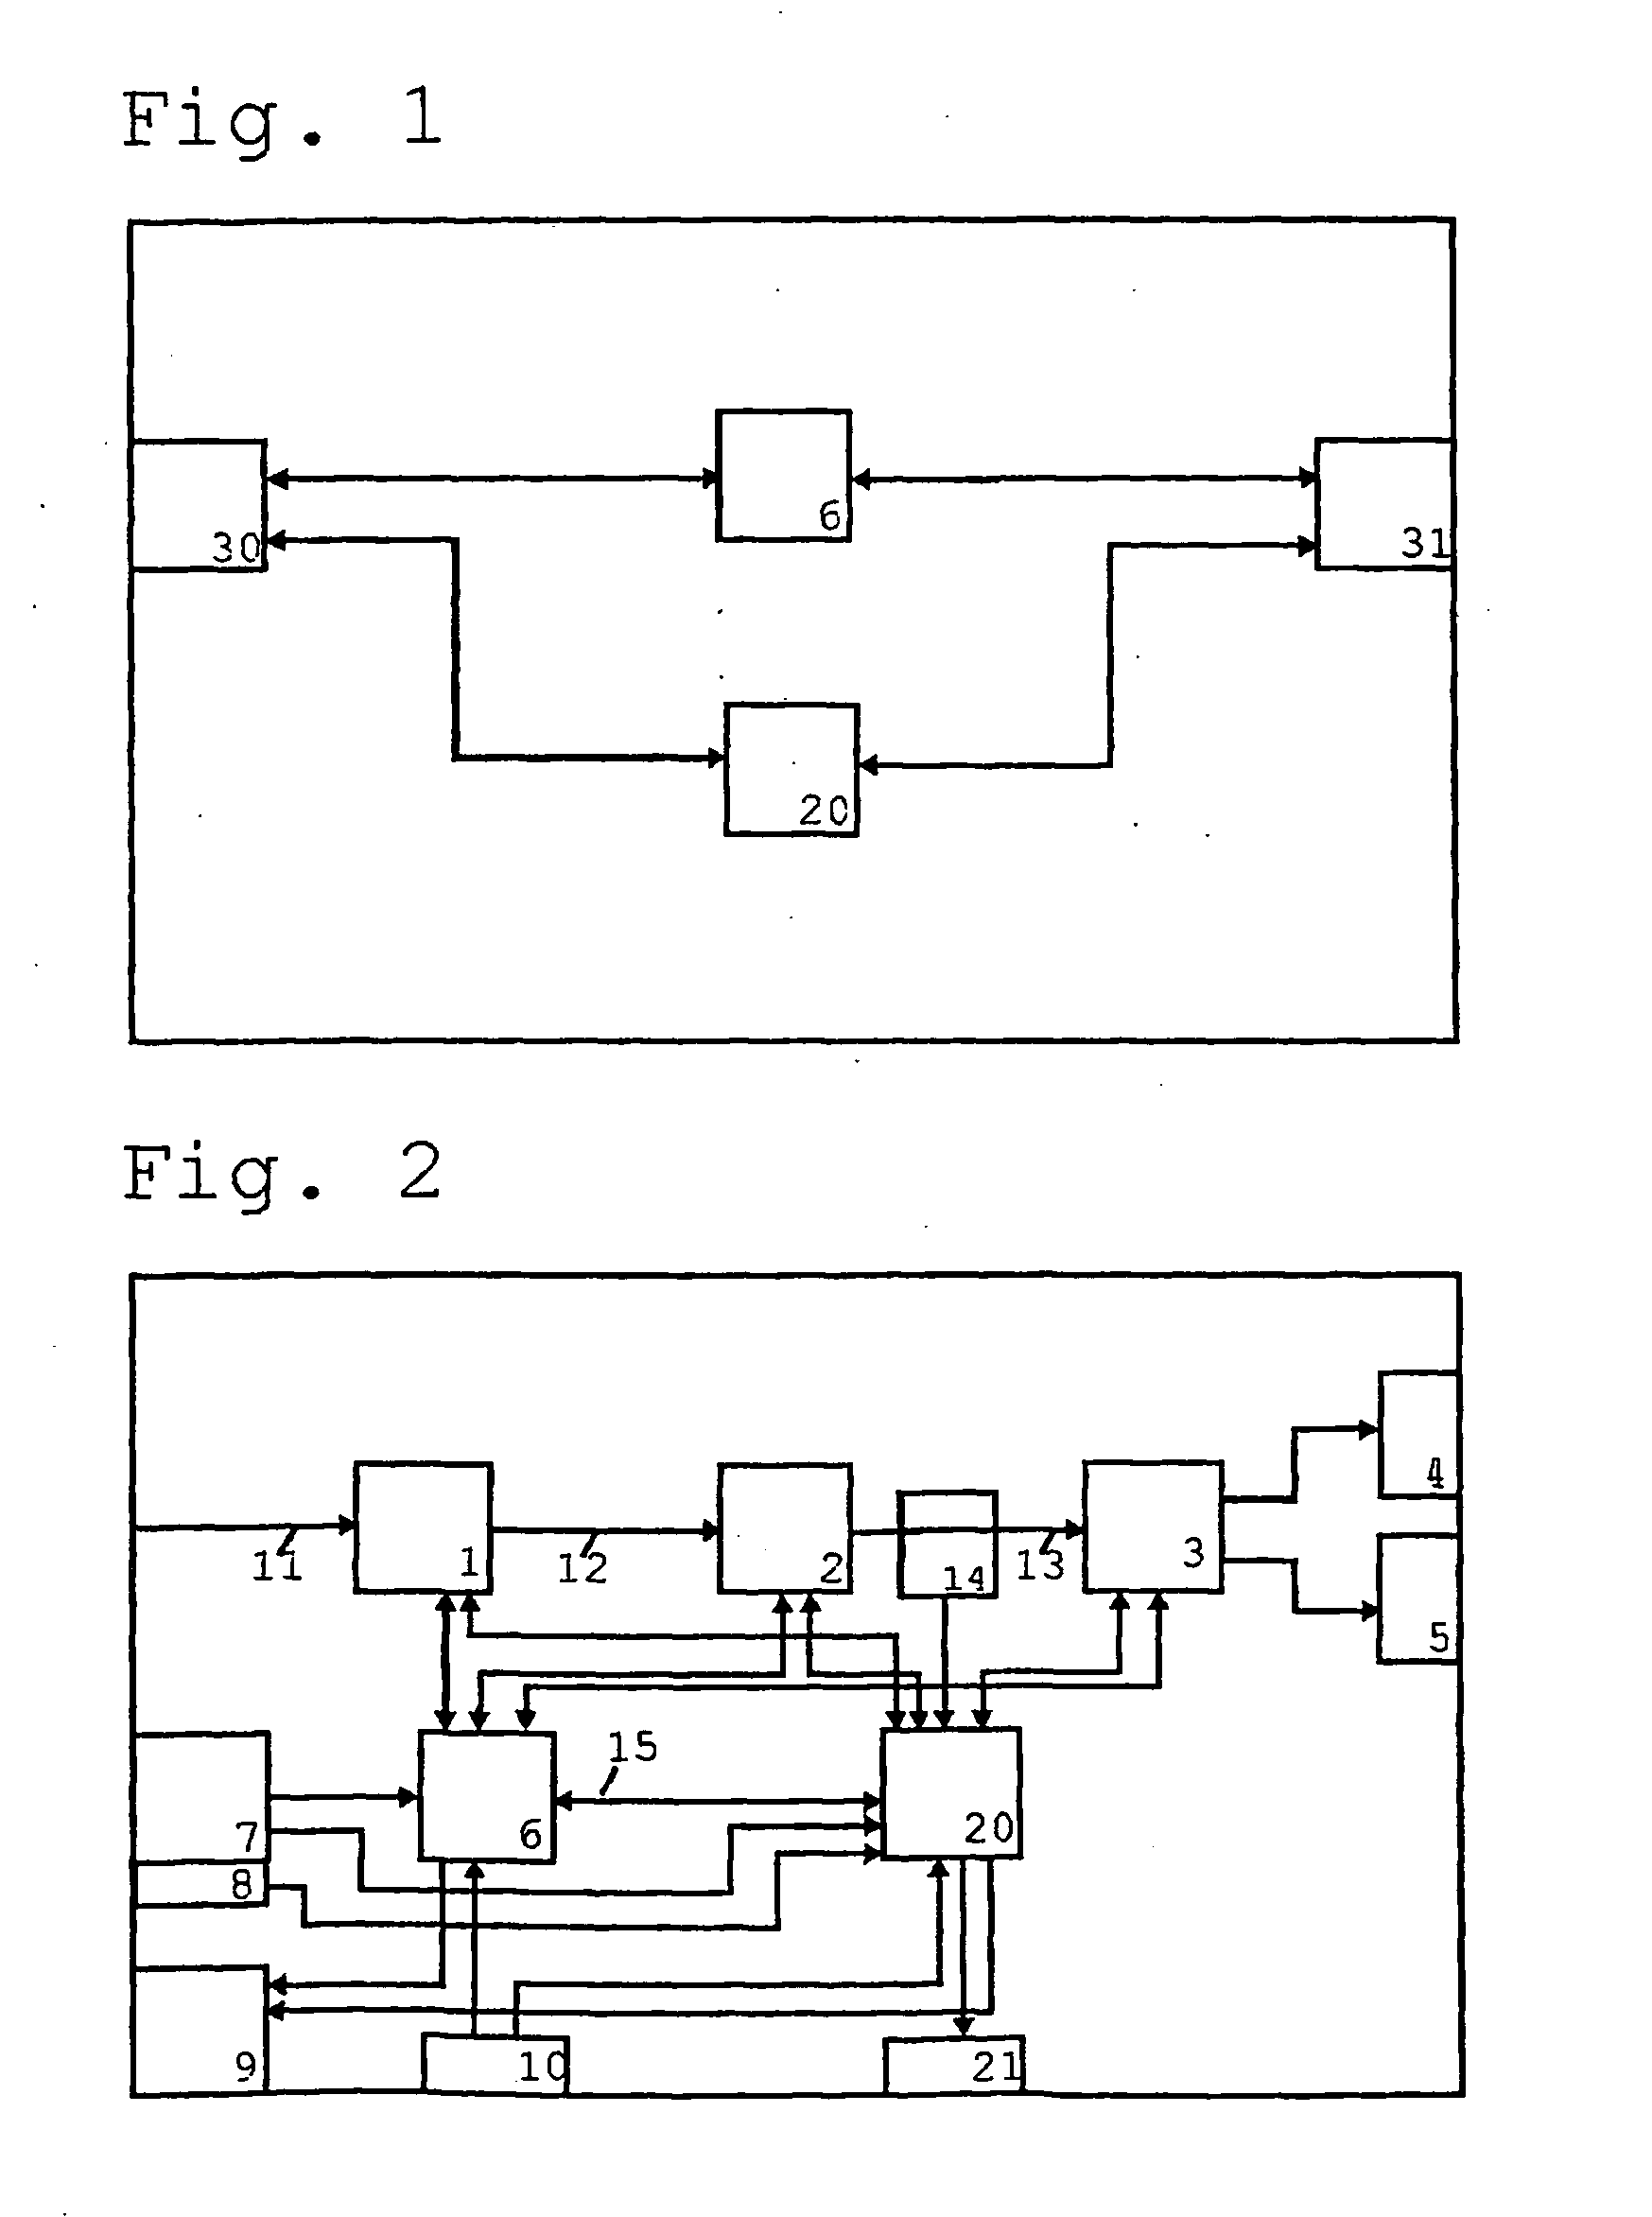 Device for monitoring medical equipment